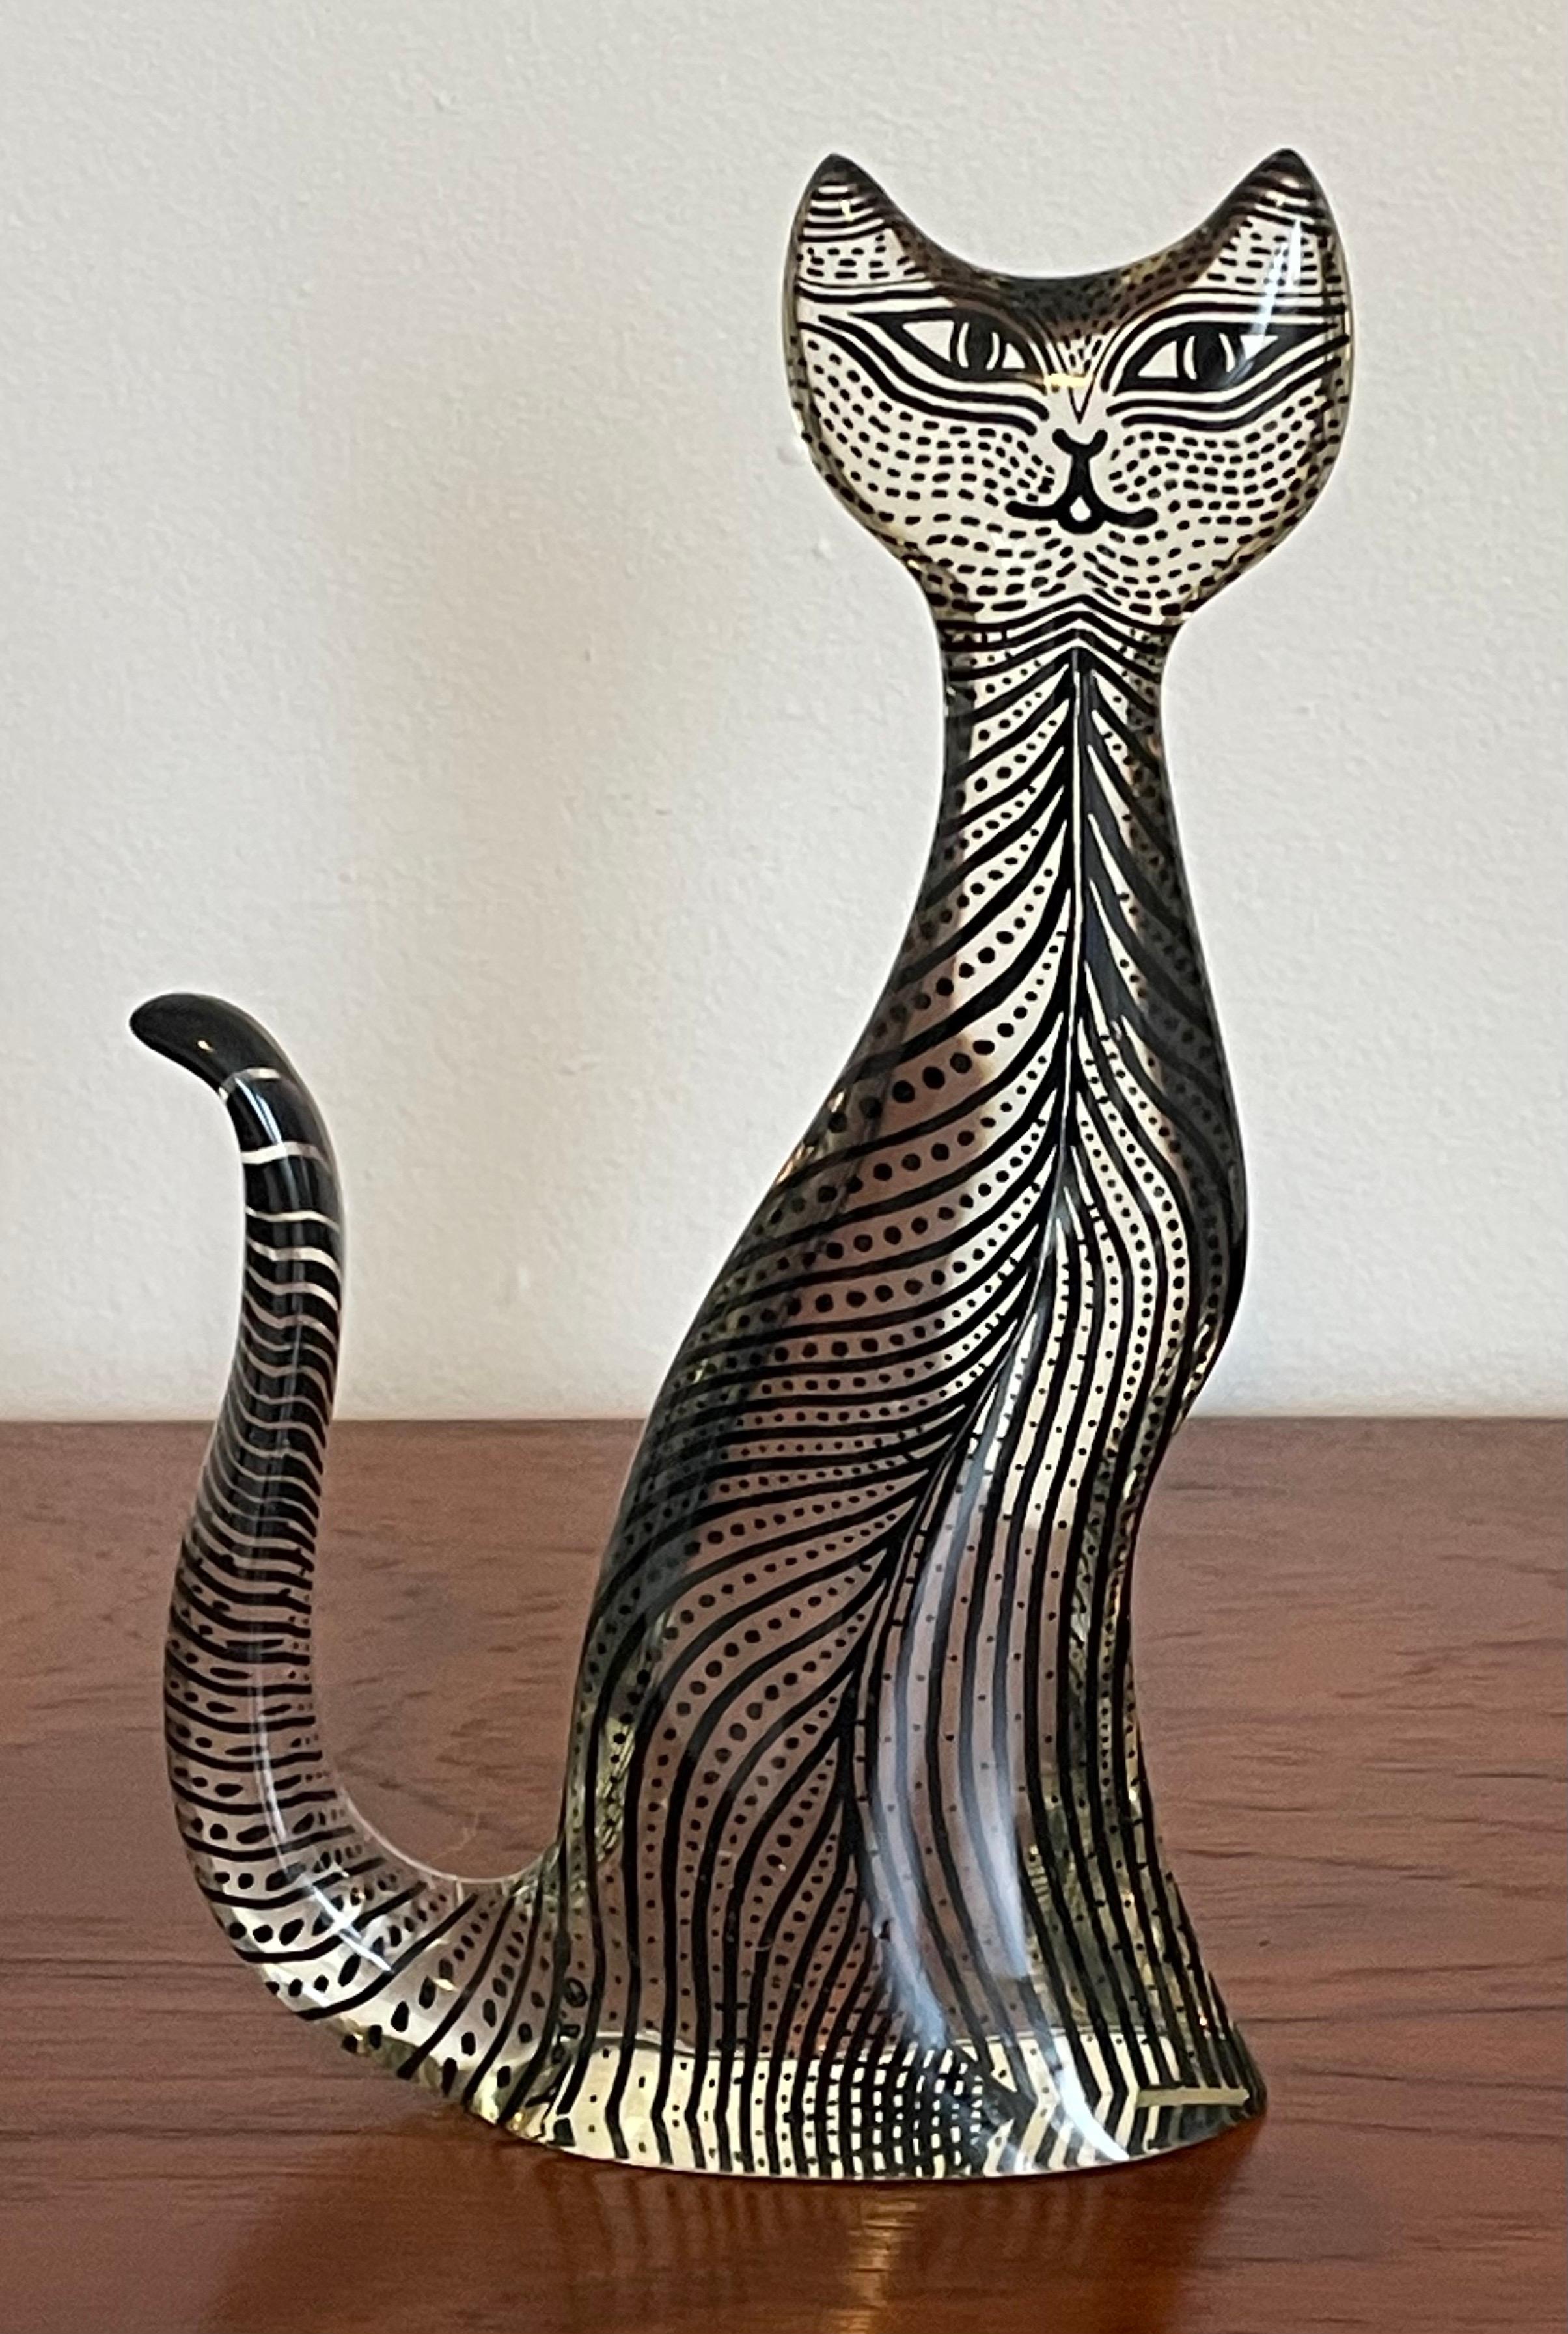 Cool mid century lucite cat sculpture by Abraham Palatnik with original label, Brazil.

Abraham Palatnik (1928-2020) was a Brazilian artist and inventor whose innovations include kinechromatic art. Part of the Artemis collection that features